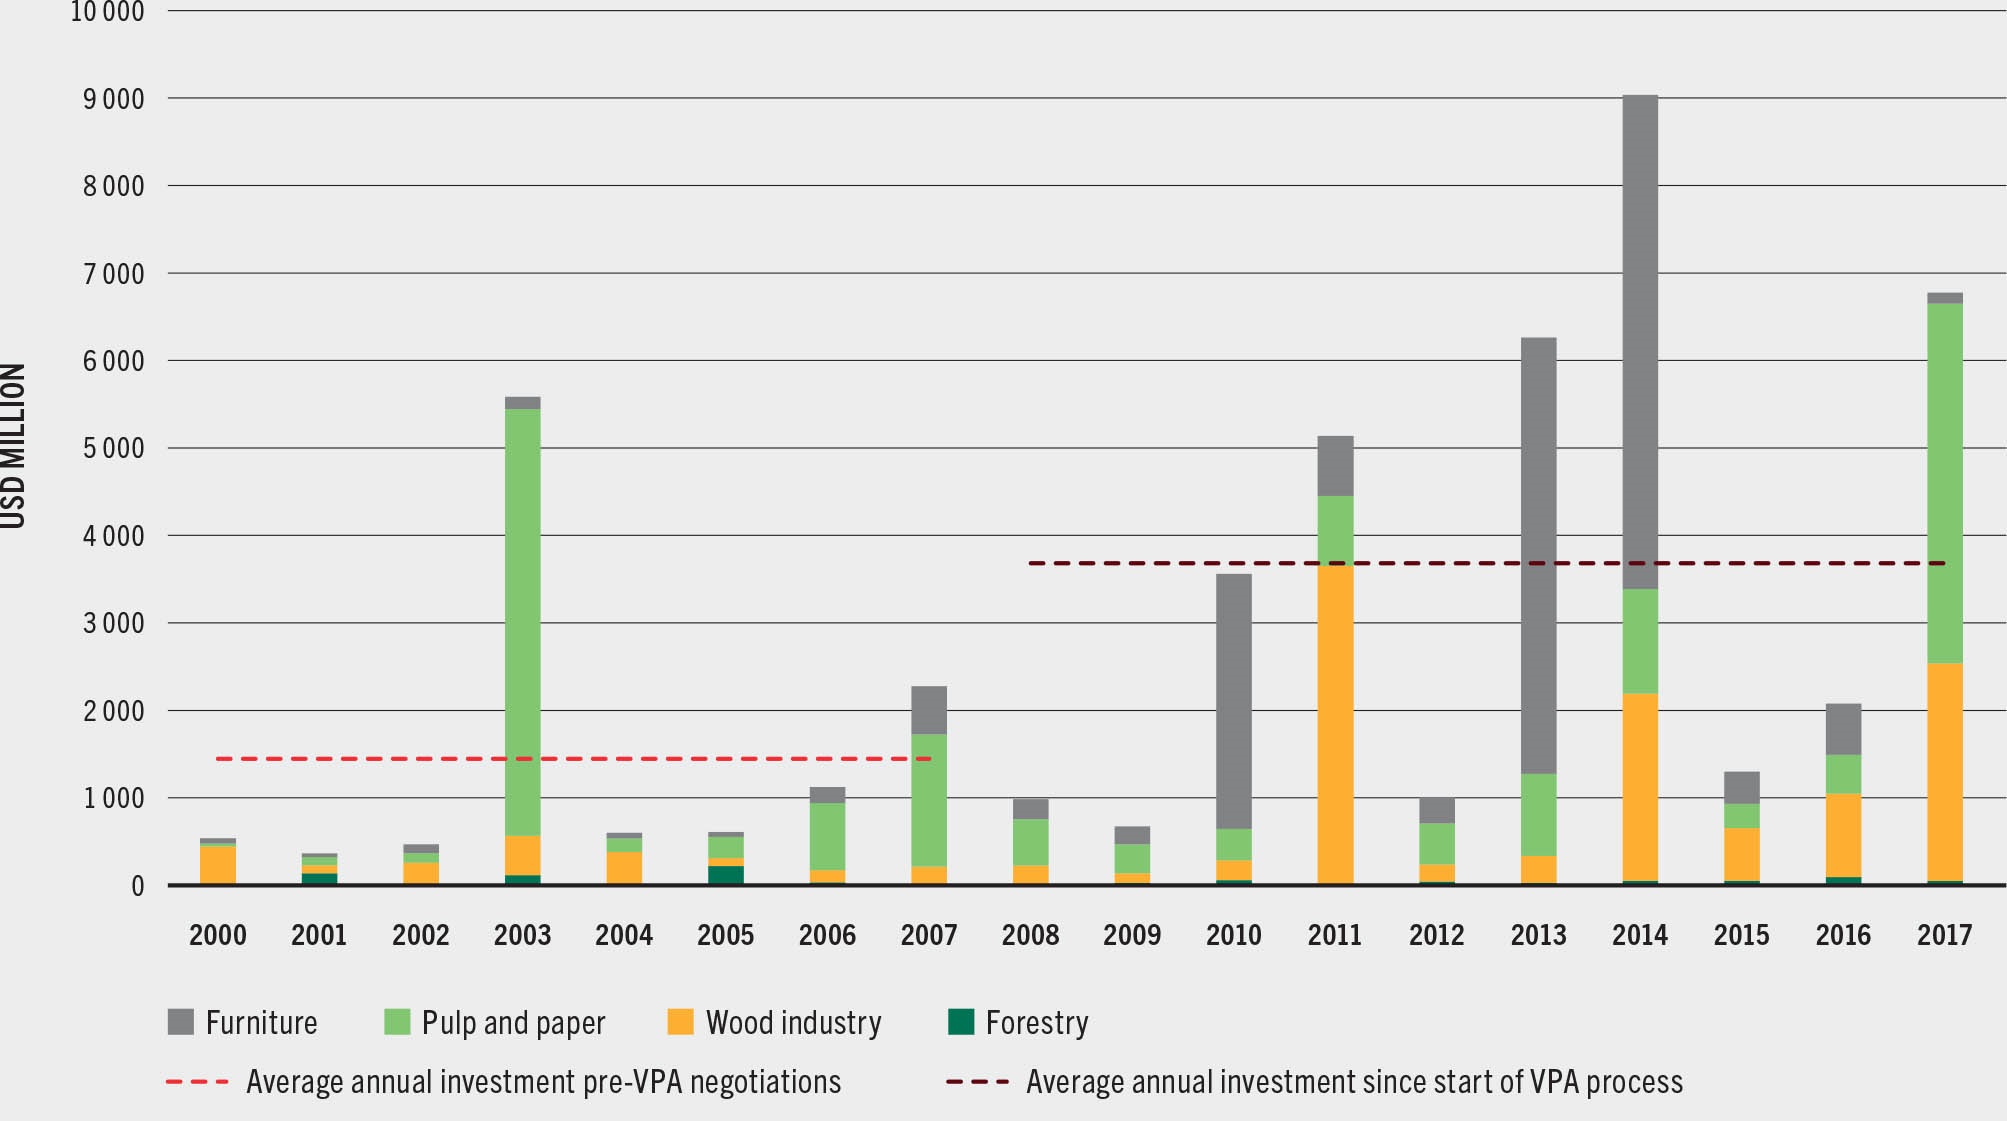 SOURCE: Held, C. 2020. The impact of FLEGT VPAs on forest sector investment risk in Indonesia and Viet Nam. Yokohama, Japan, International Tropical Timber Organization.